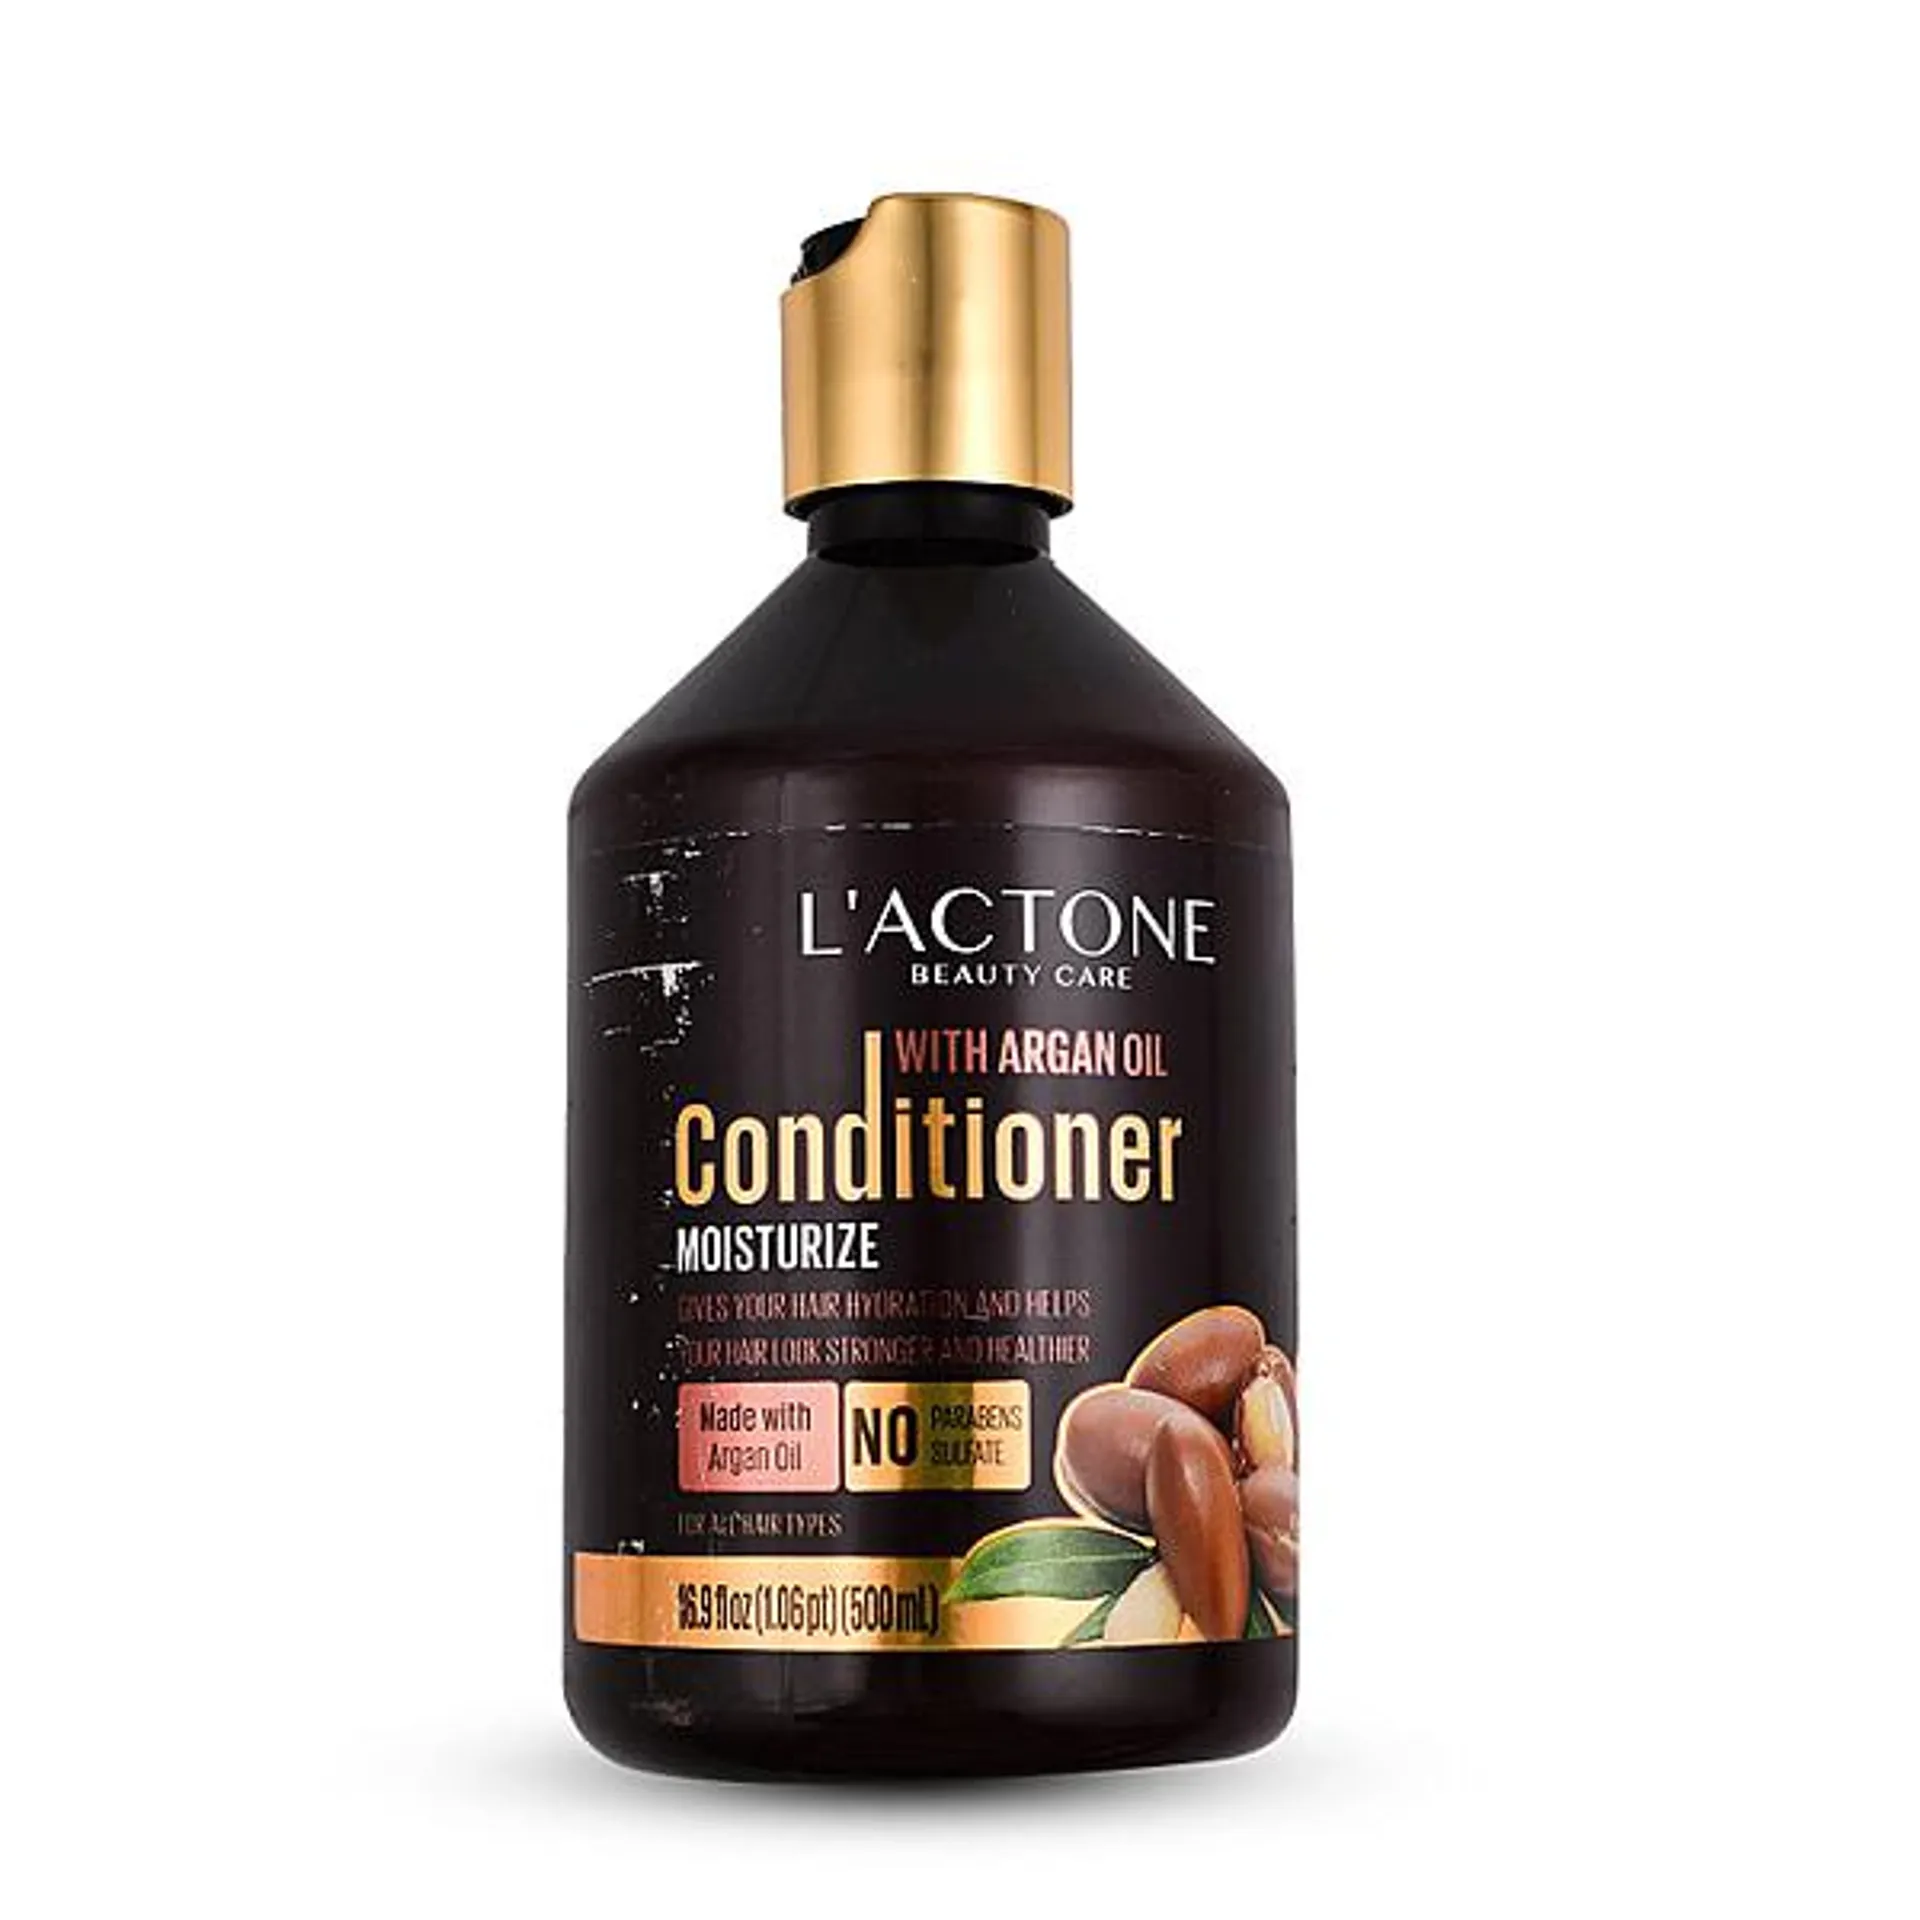 LACTONE Conditioner with Argan Oil, Hydration and Strengthening Shampoo For Men Women with Extra Dry Hair